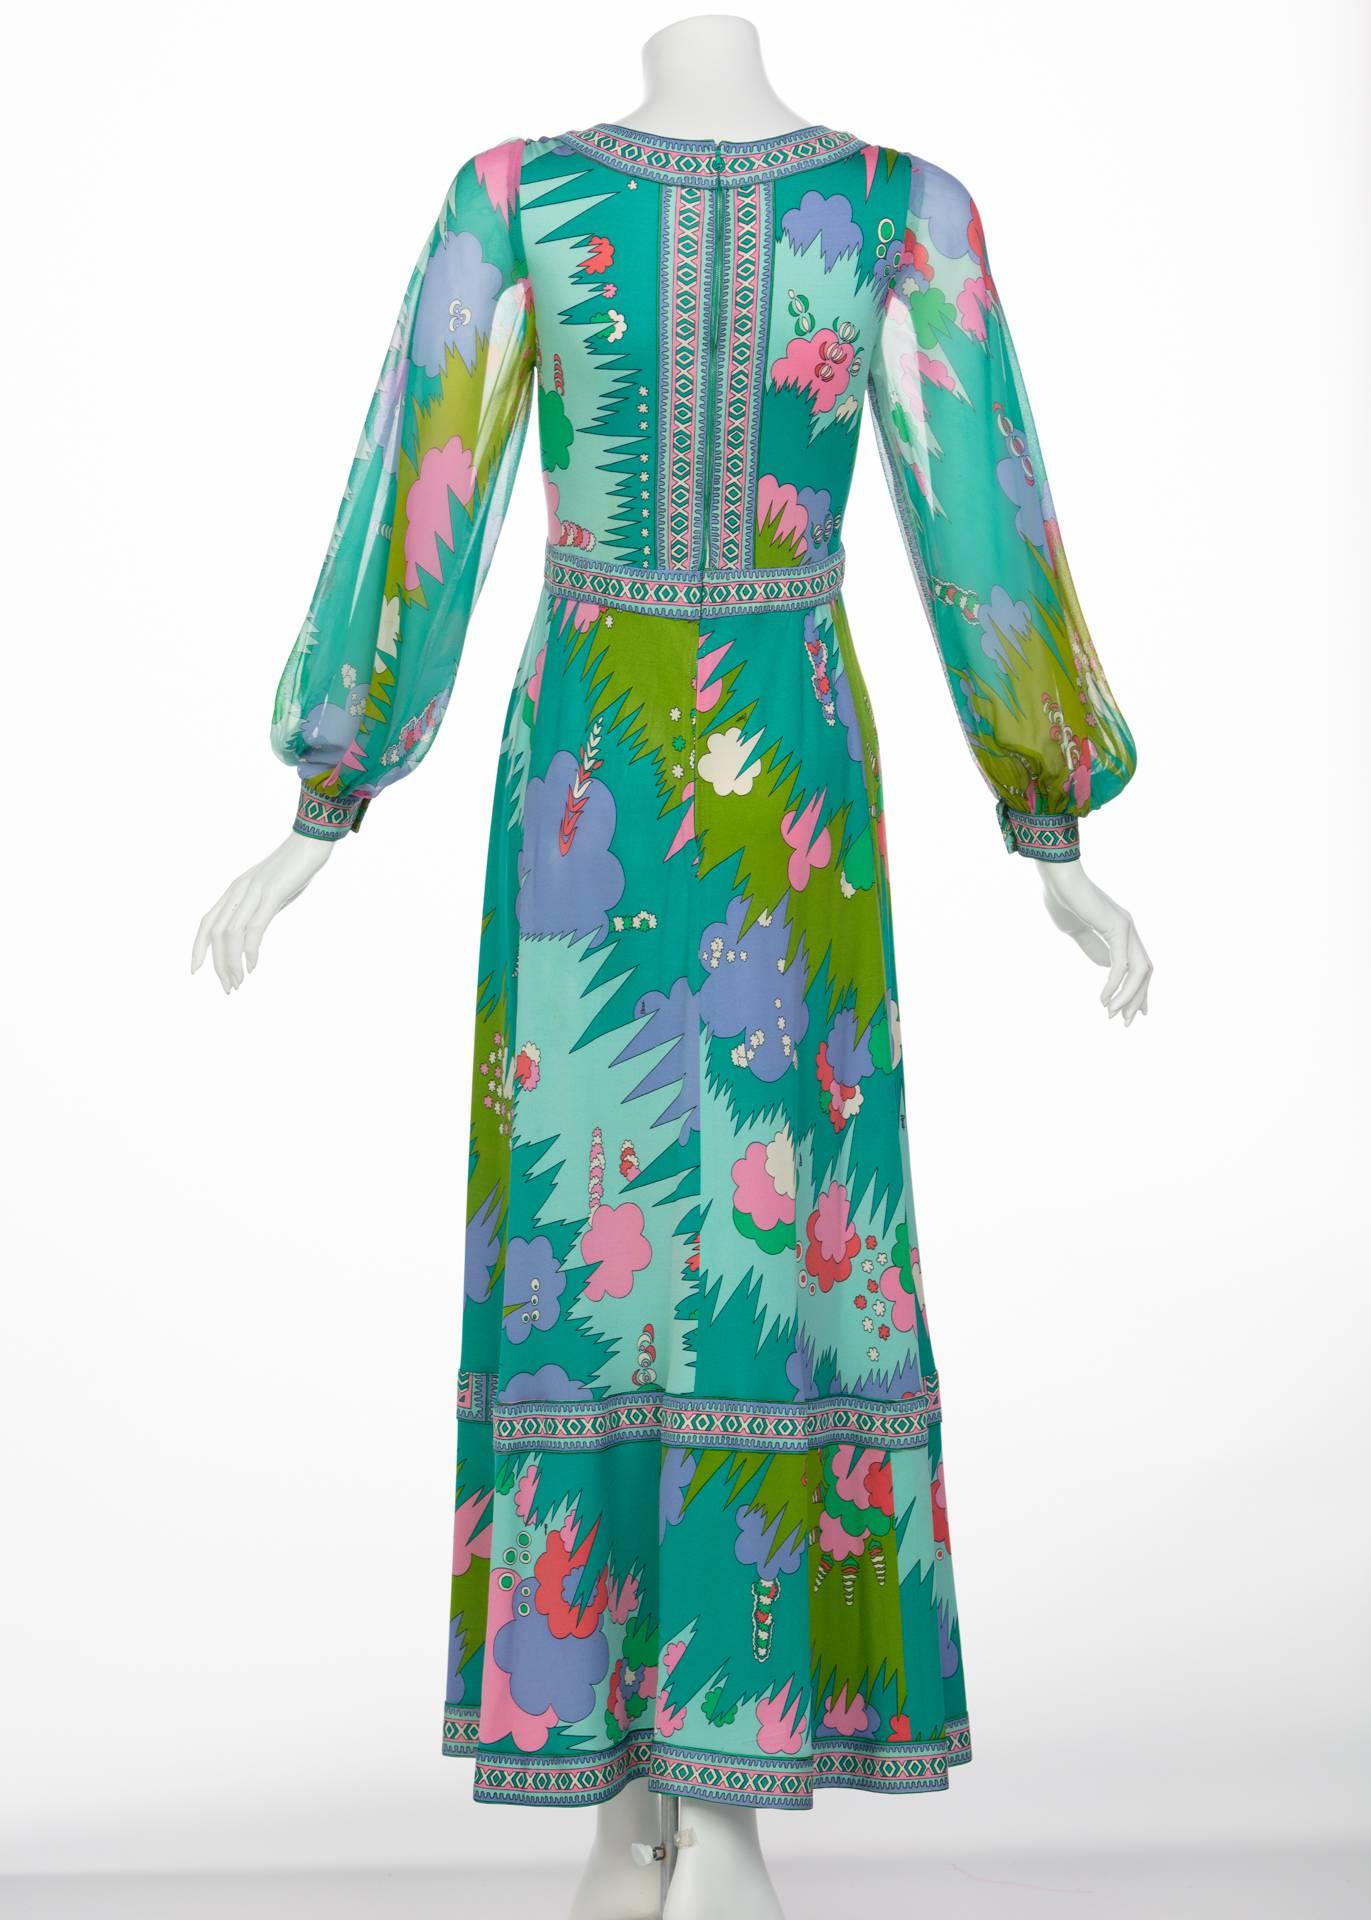 Bessi Multicolored Silk Jersey Chiffon Sleeves Maxi dress, 1970s  In Good Condition For Sale In Boca Raton, FL